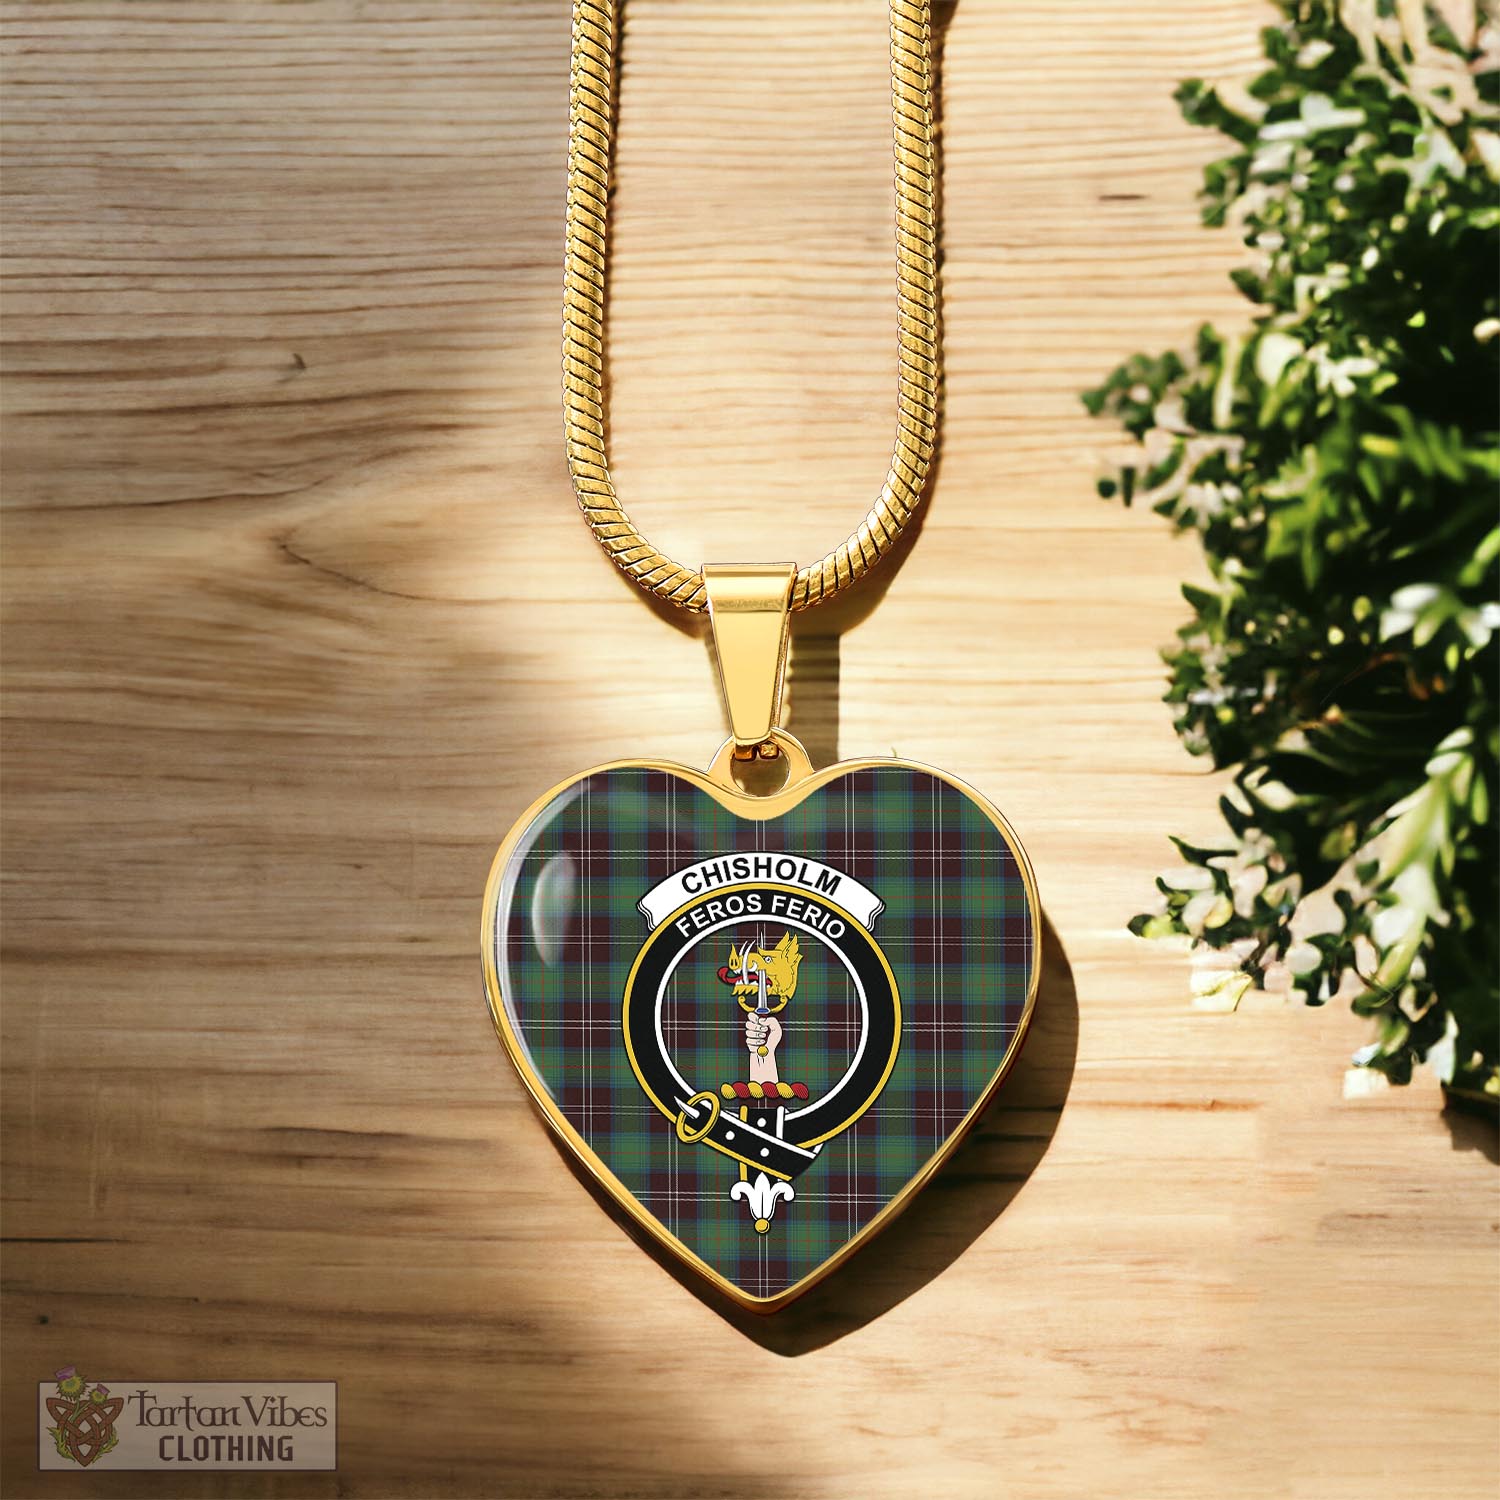 Tartan Vibes Clothing Chisholm Hunting Ancient Tartan Heart Necklace with Family Crest